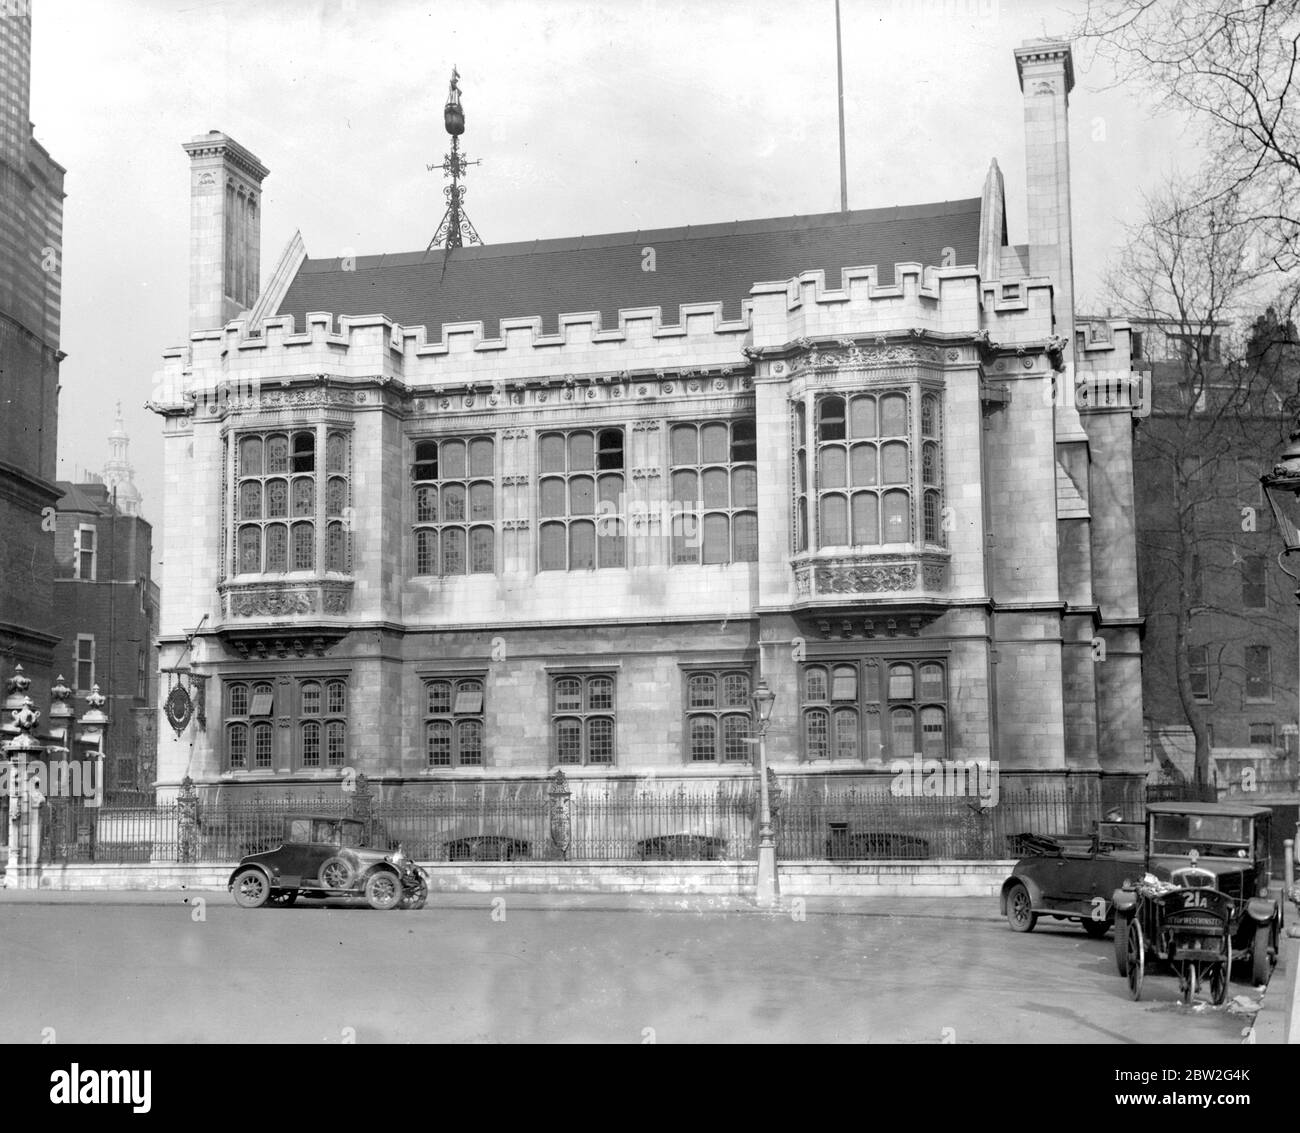 Incorporated Chartered Accountants Hall formaly:- Astor House, Victoria Embankment, Buit at cost of Â£250,000 as an Estate Office for the late Lord Astor, later offices of Sun Life Co.. 20 March 1928 Stock Photo